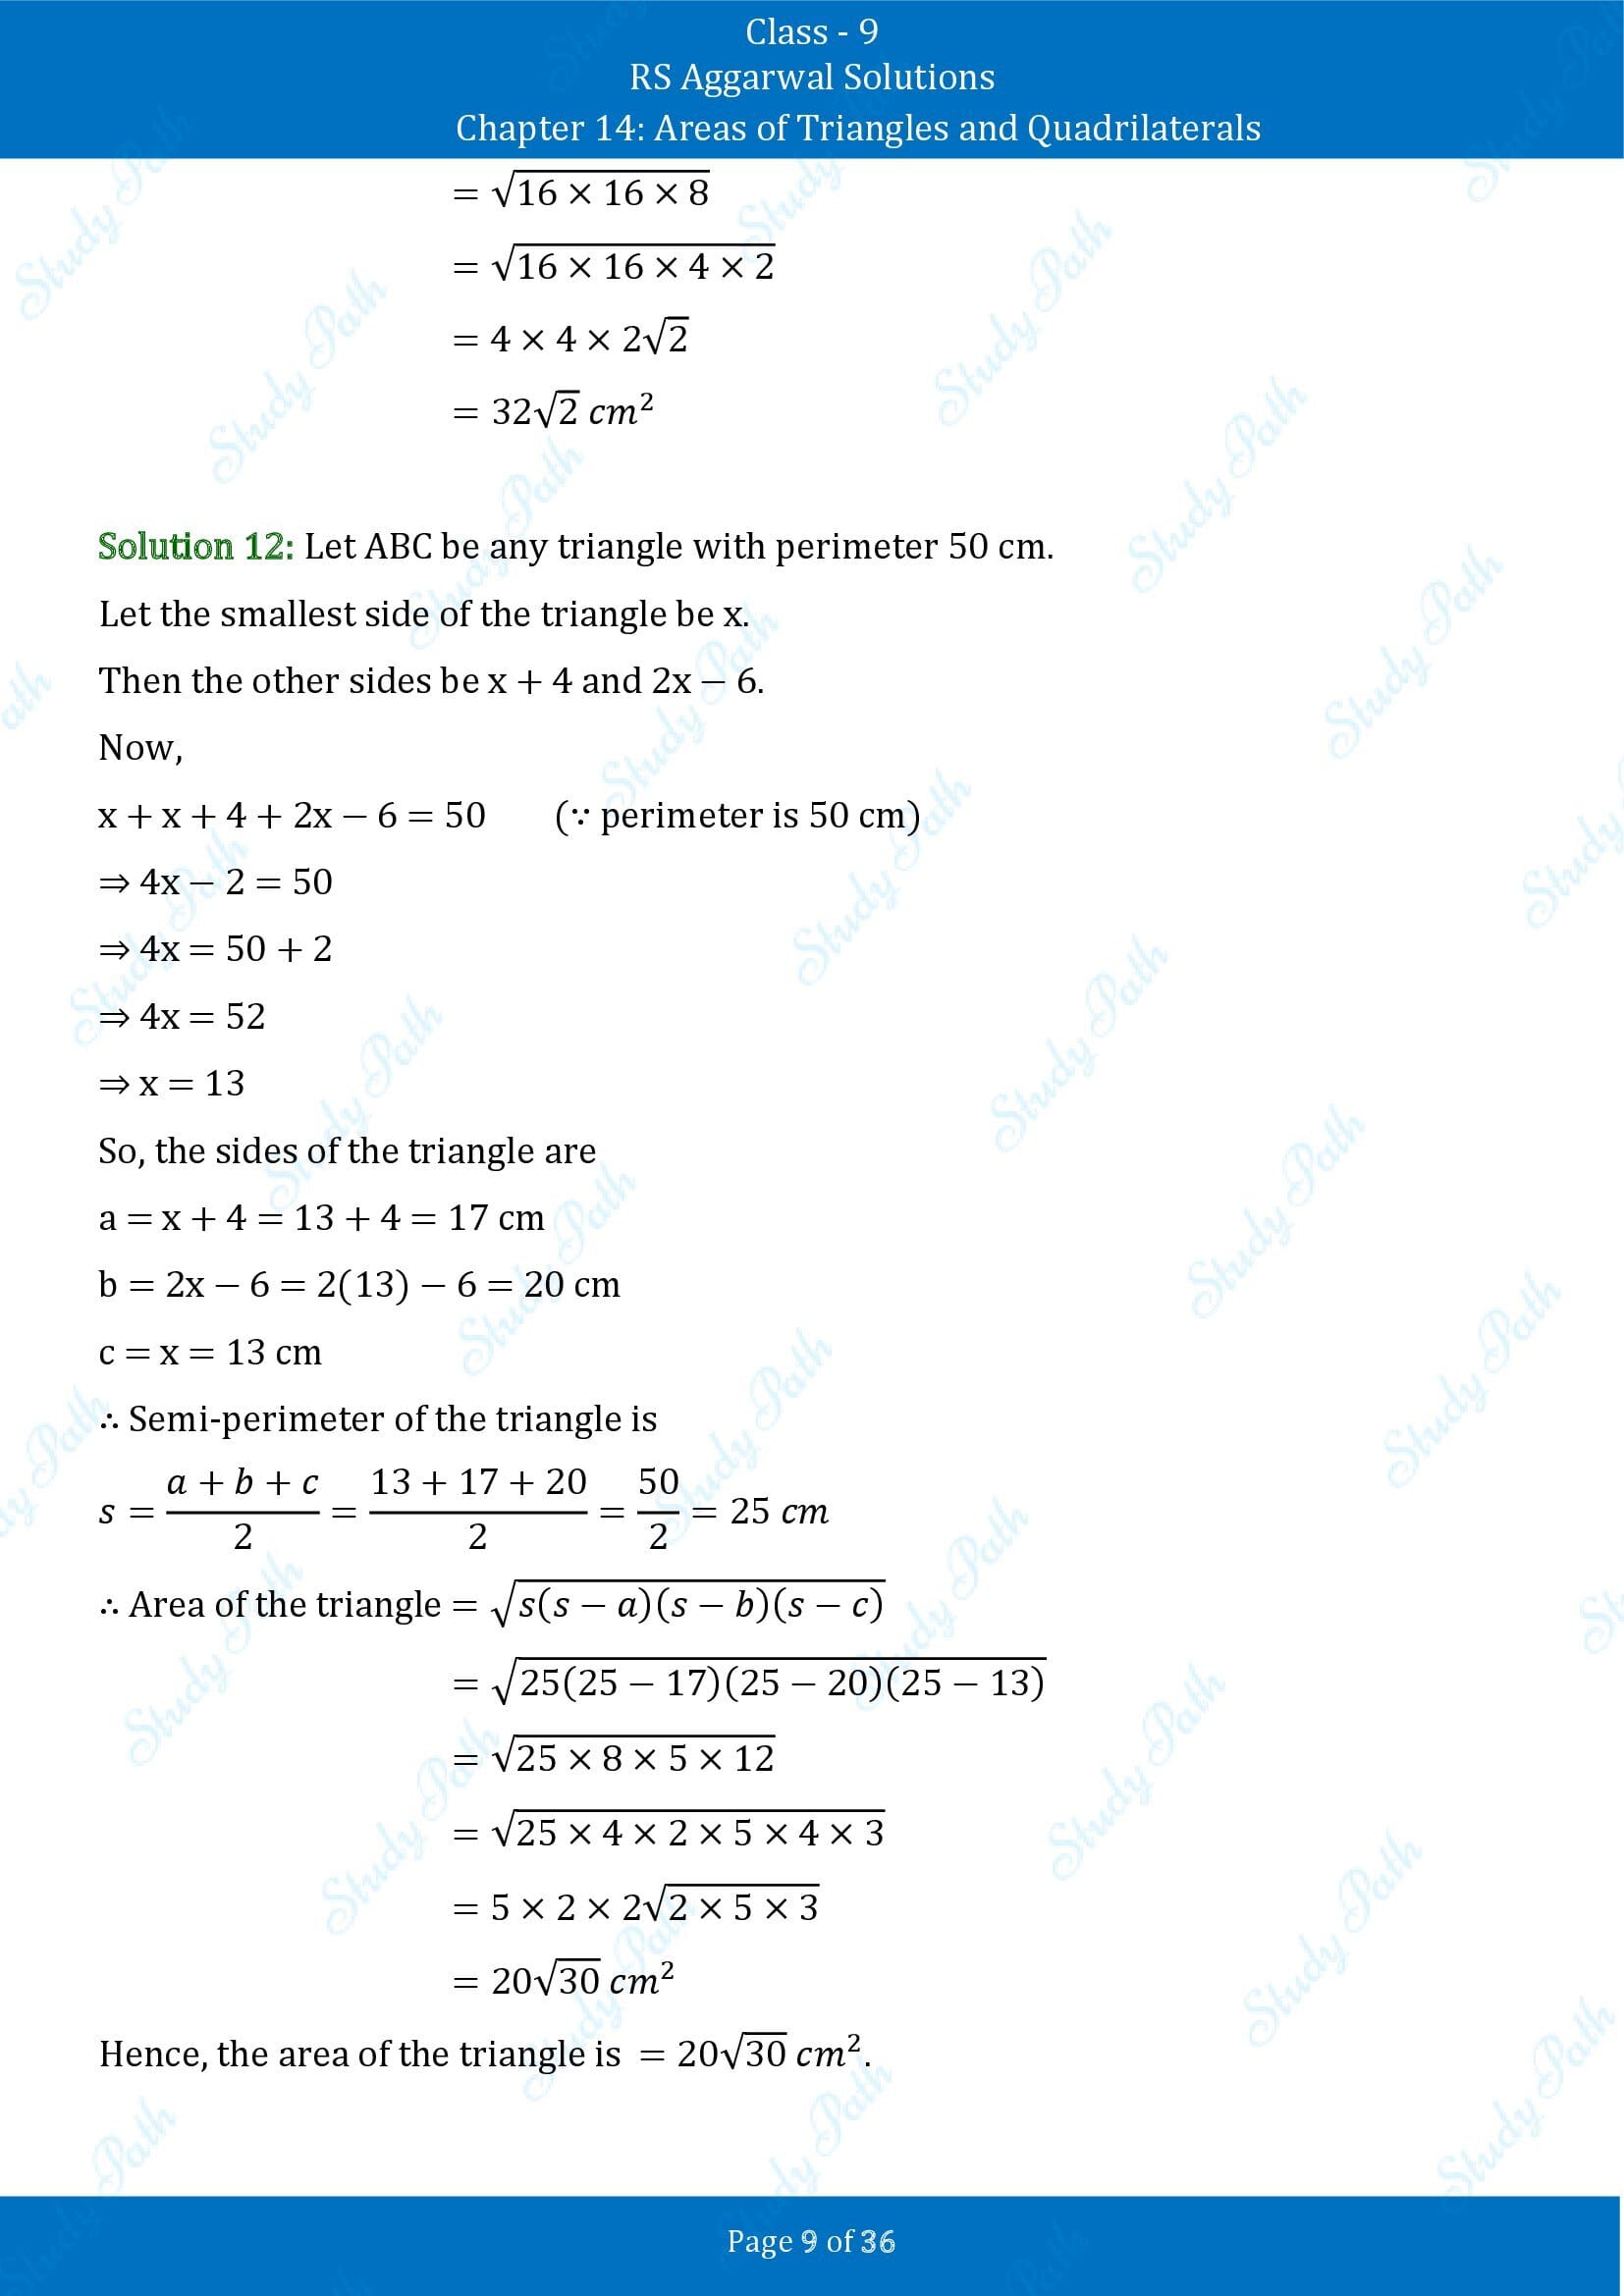 RS Aggarwal Solutions Class 9 Chapter 14 Areas of Triangles and Quadrilaterals Exercise 14 00009